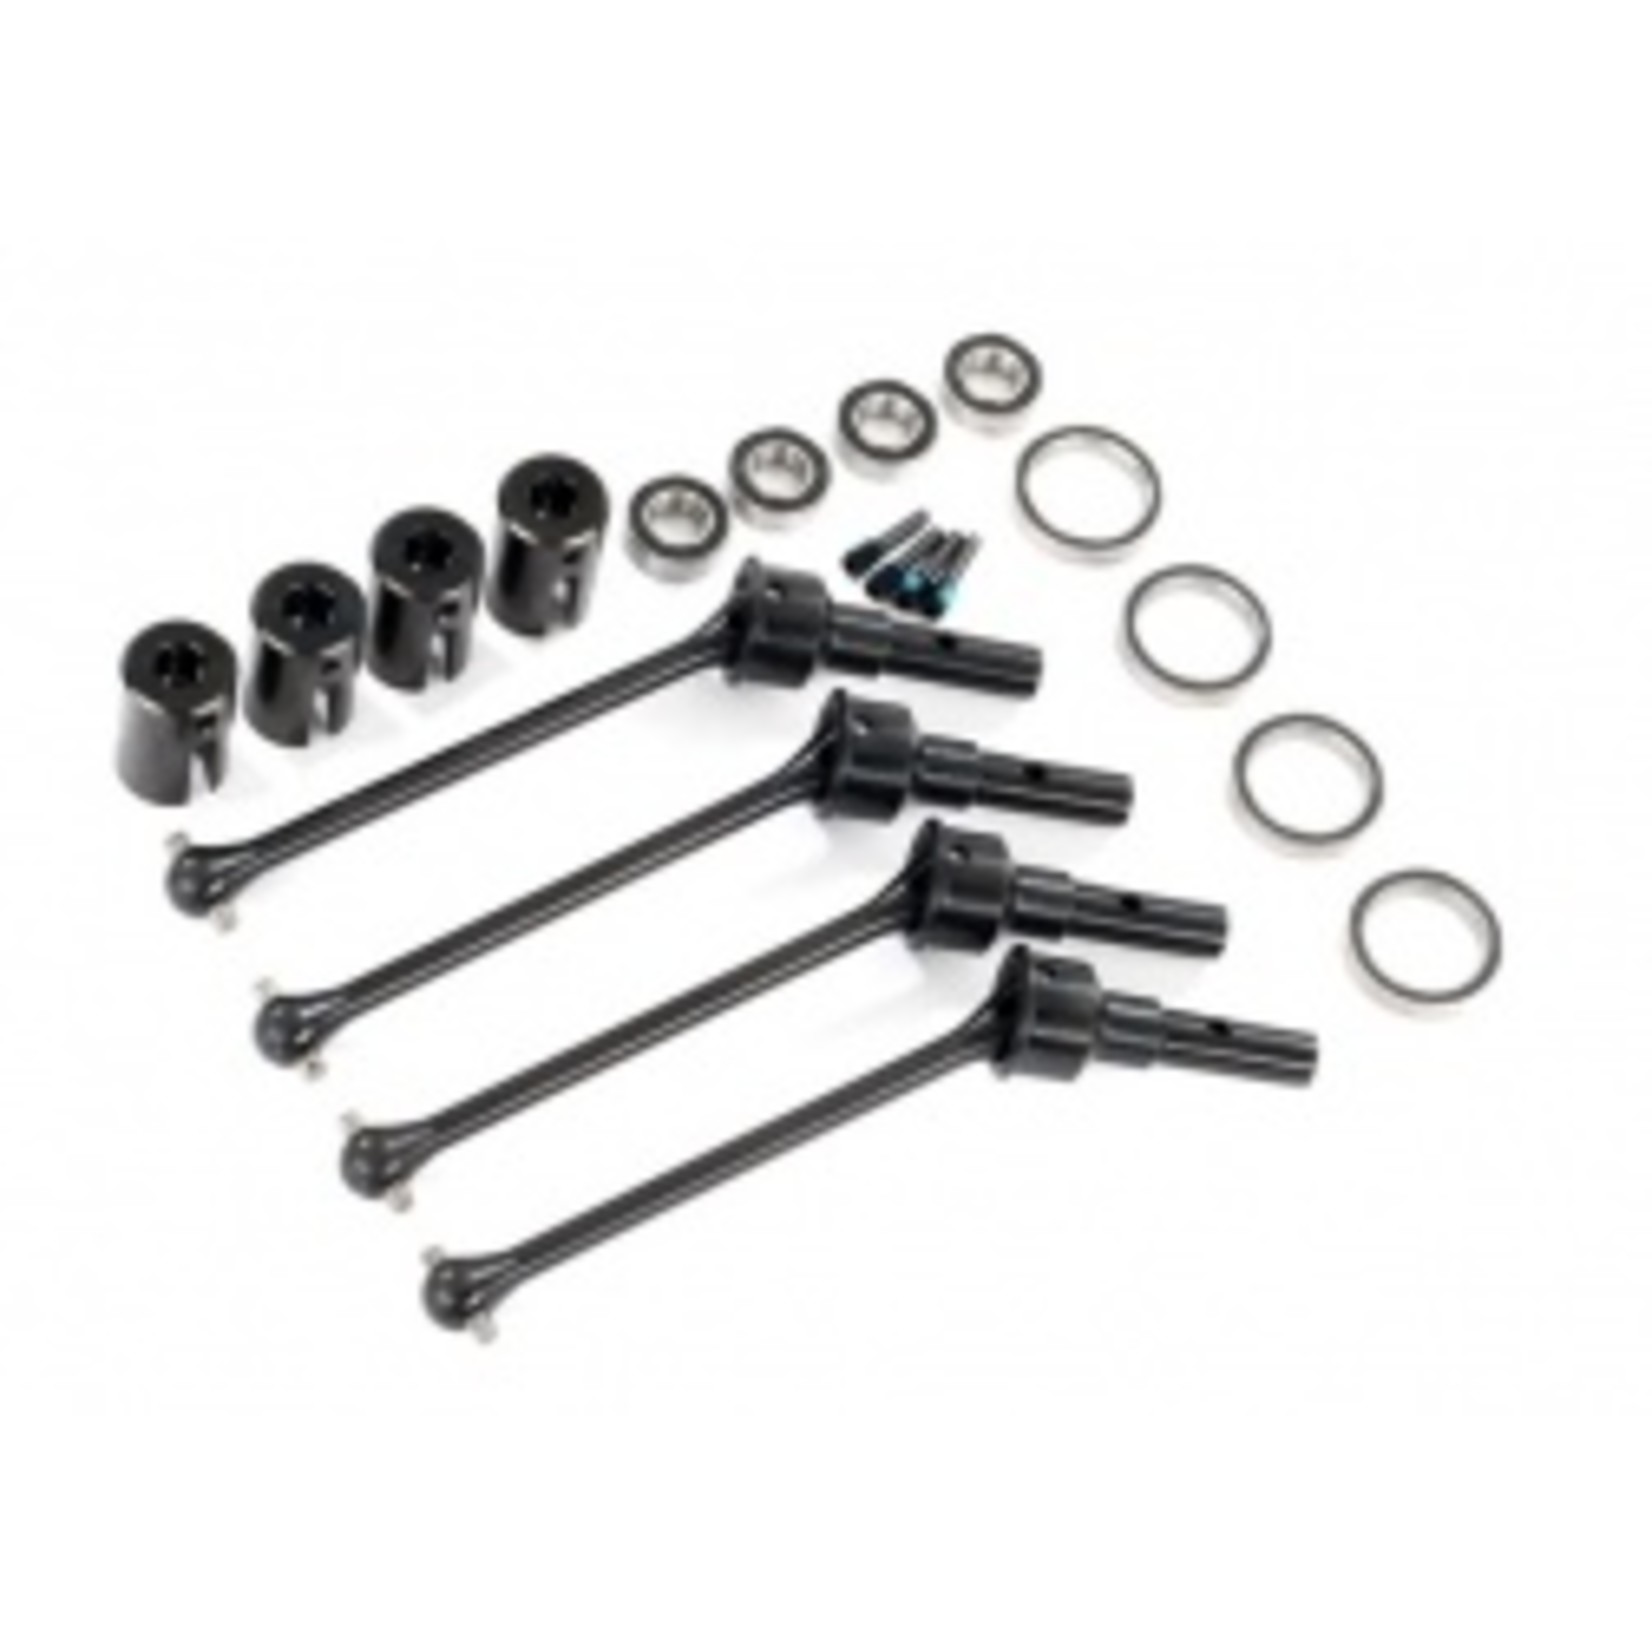 Traxxas Driveshafts, steel constant-velocity (assembled), front or rear (4) (#8654, 8654G, or 8654R and #7758, 7758G, or 7758R required for a complete set)